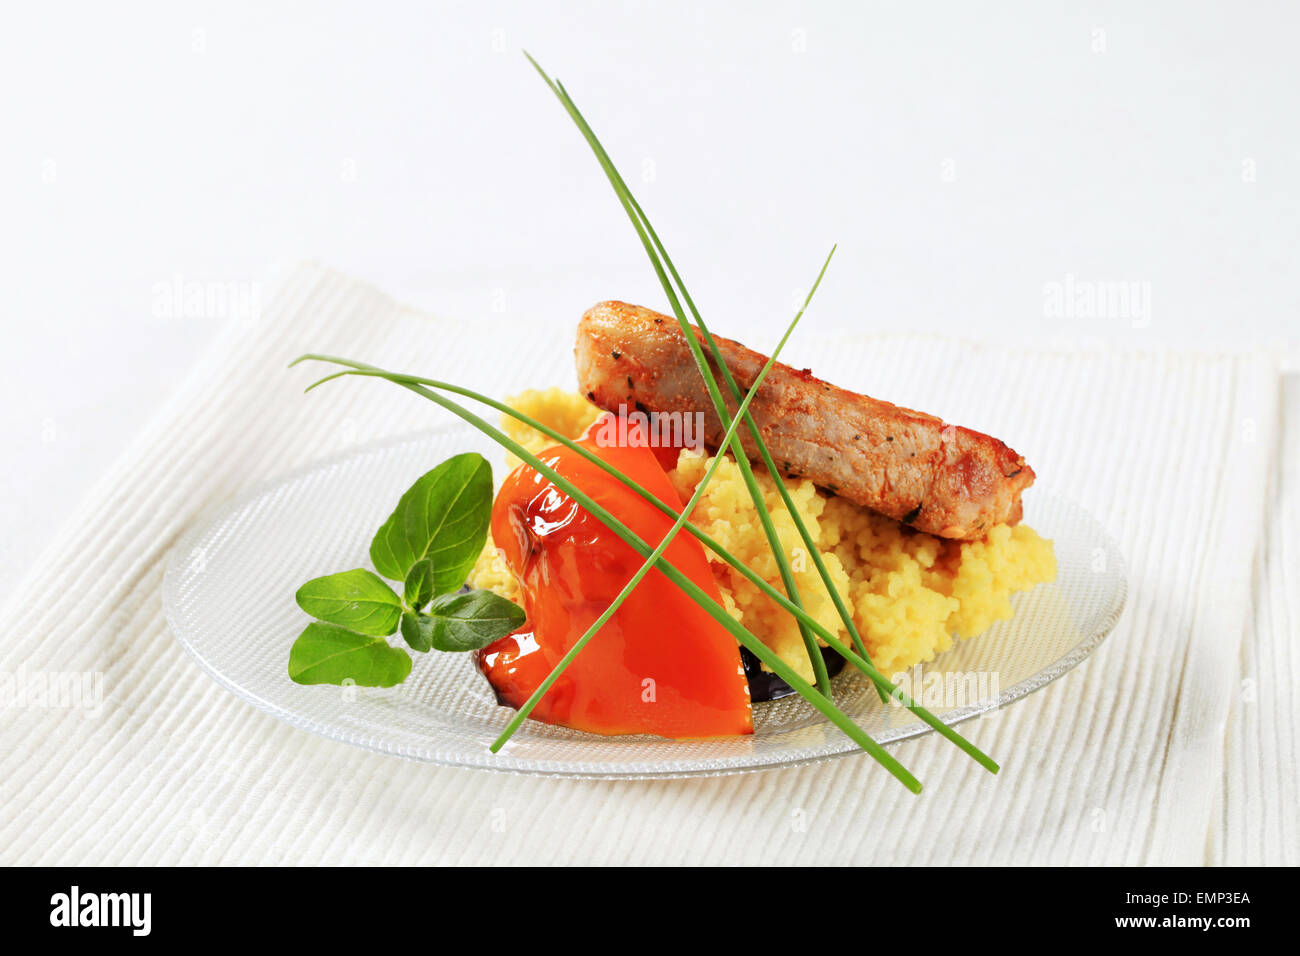 Marinated pork served with couscous Stock Photo